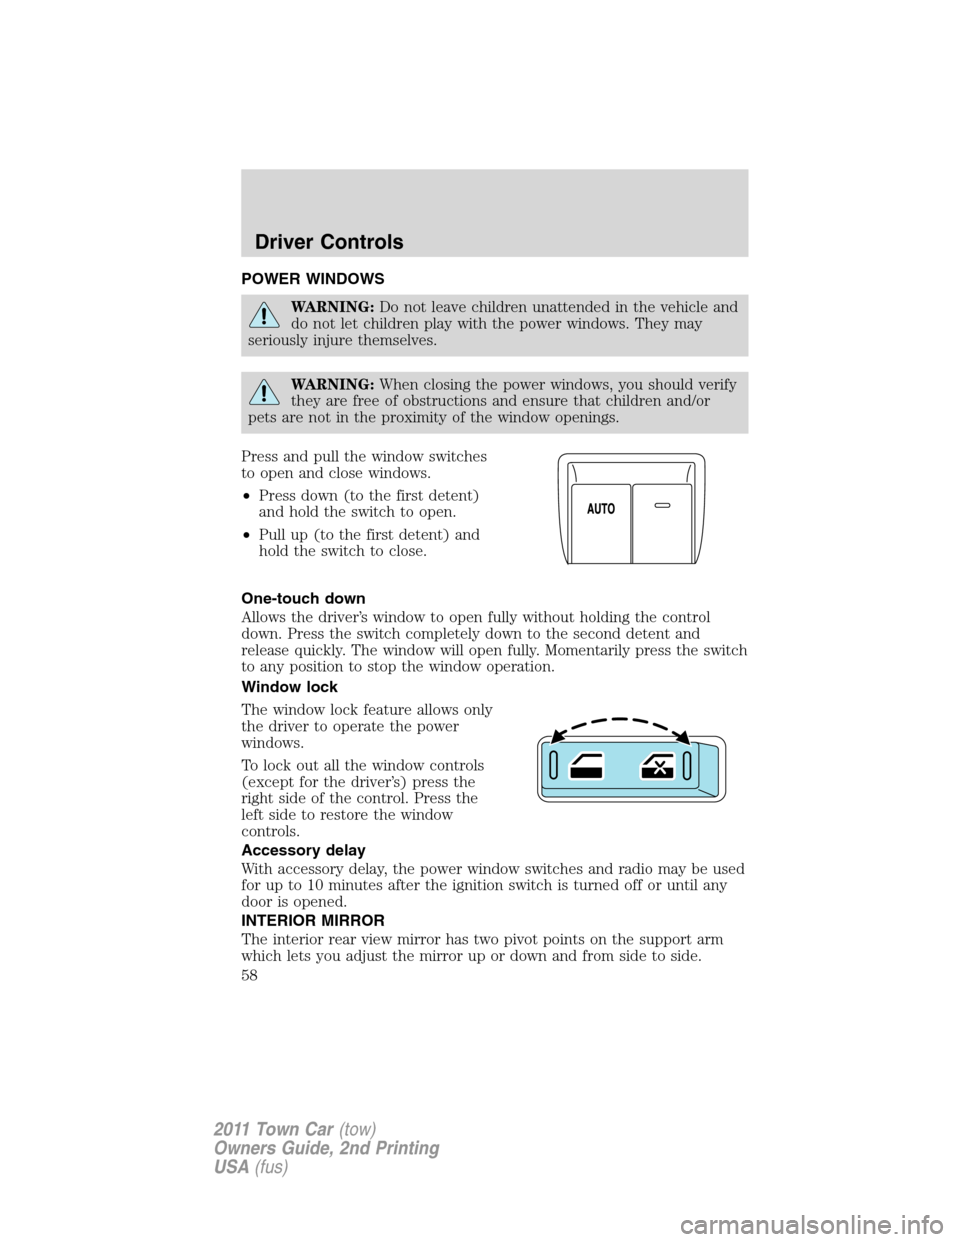 LINCOLN TOWN CAR 2011 Workshop Manual POWER WINDOWS
WARNING:Do not leave children unattended in the vehicle and
do not let children play with the power windows. They may
seriously injure themselves.
WARNING:When closing the power windows,